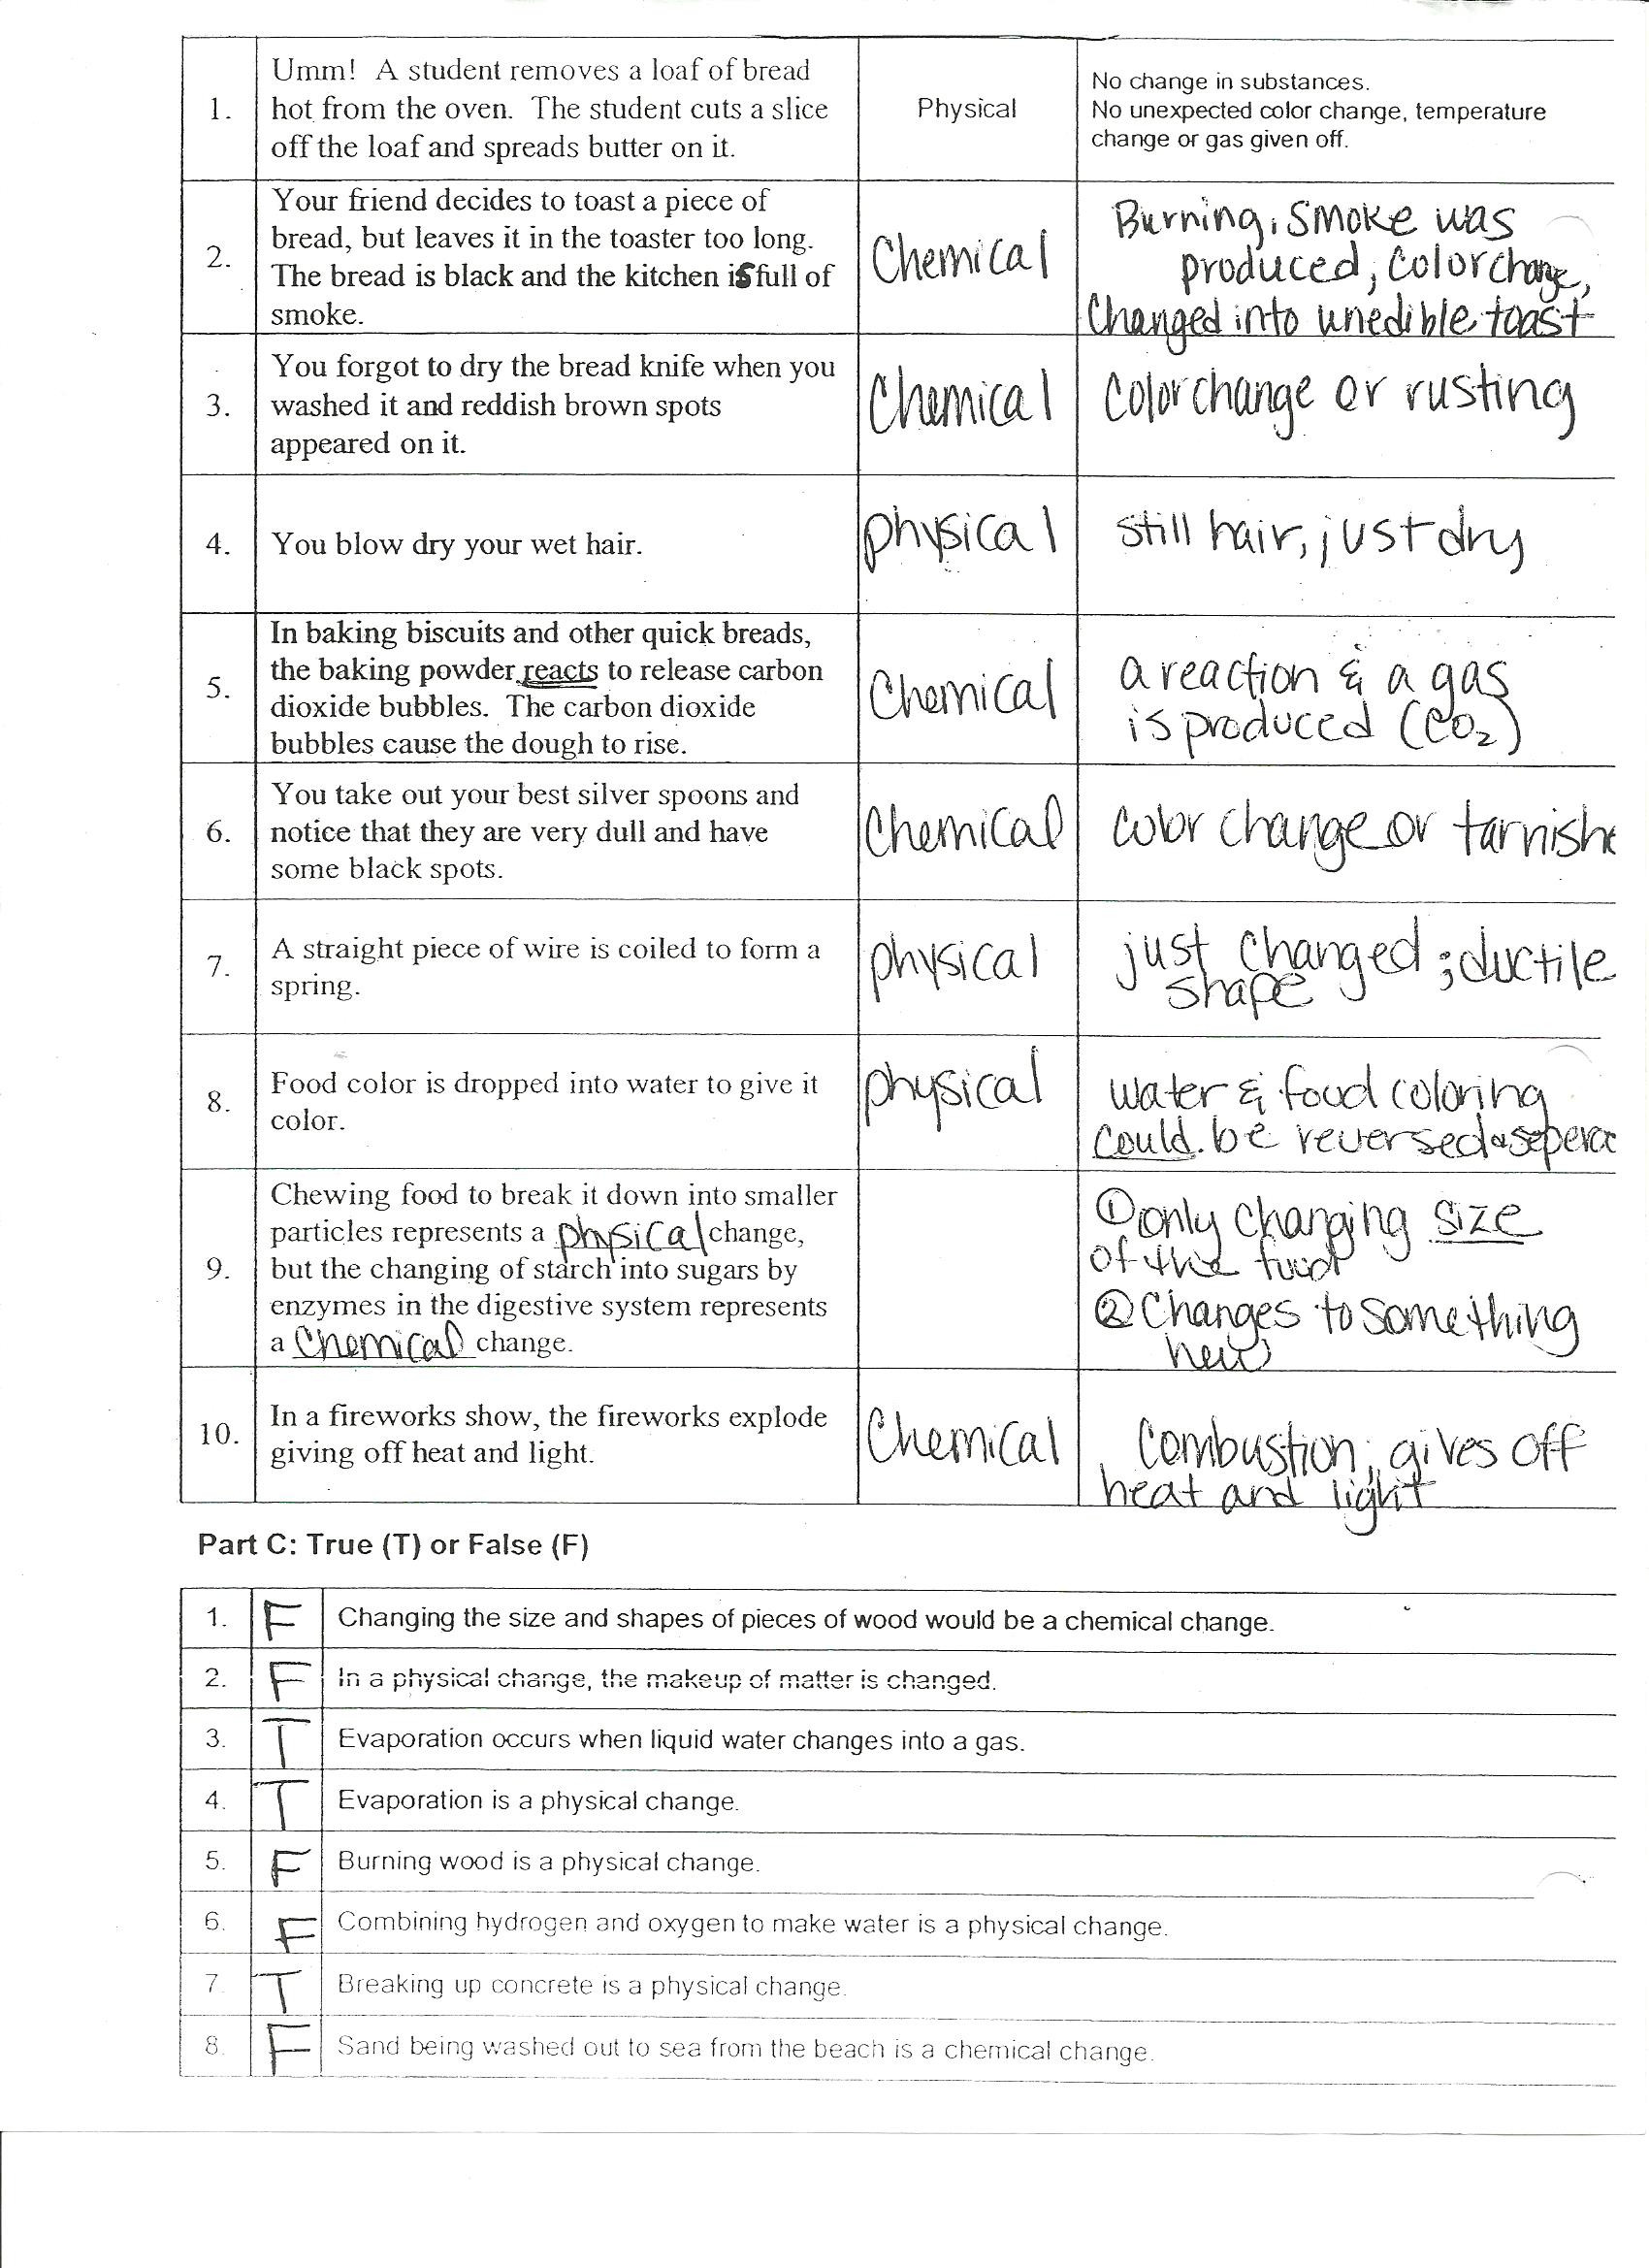 Physical Vs Chemical Changes Worksheet Chemical and Physical Properties Worksheet Answers